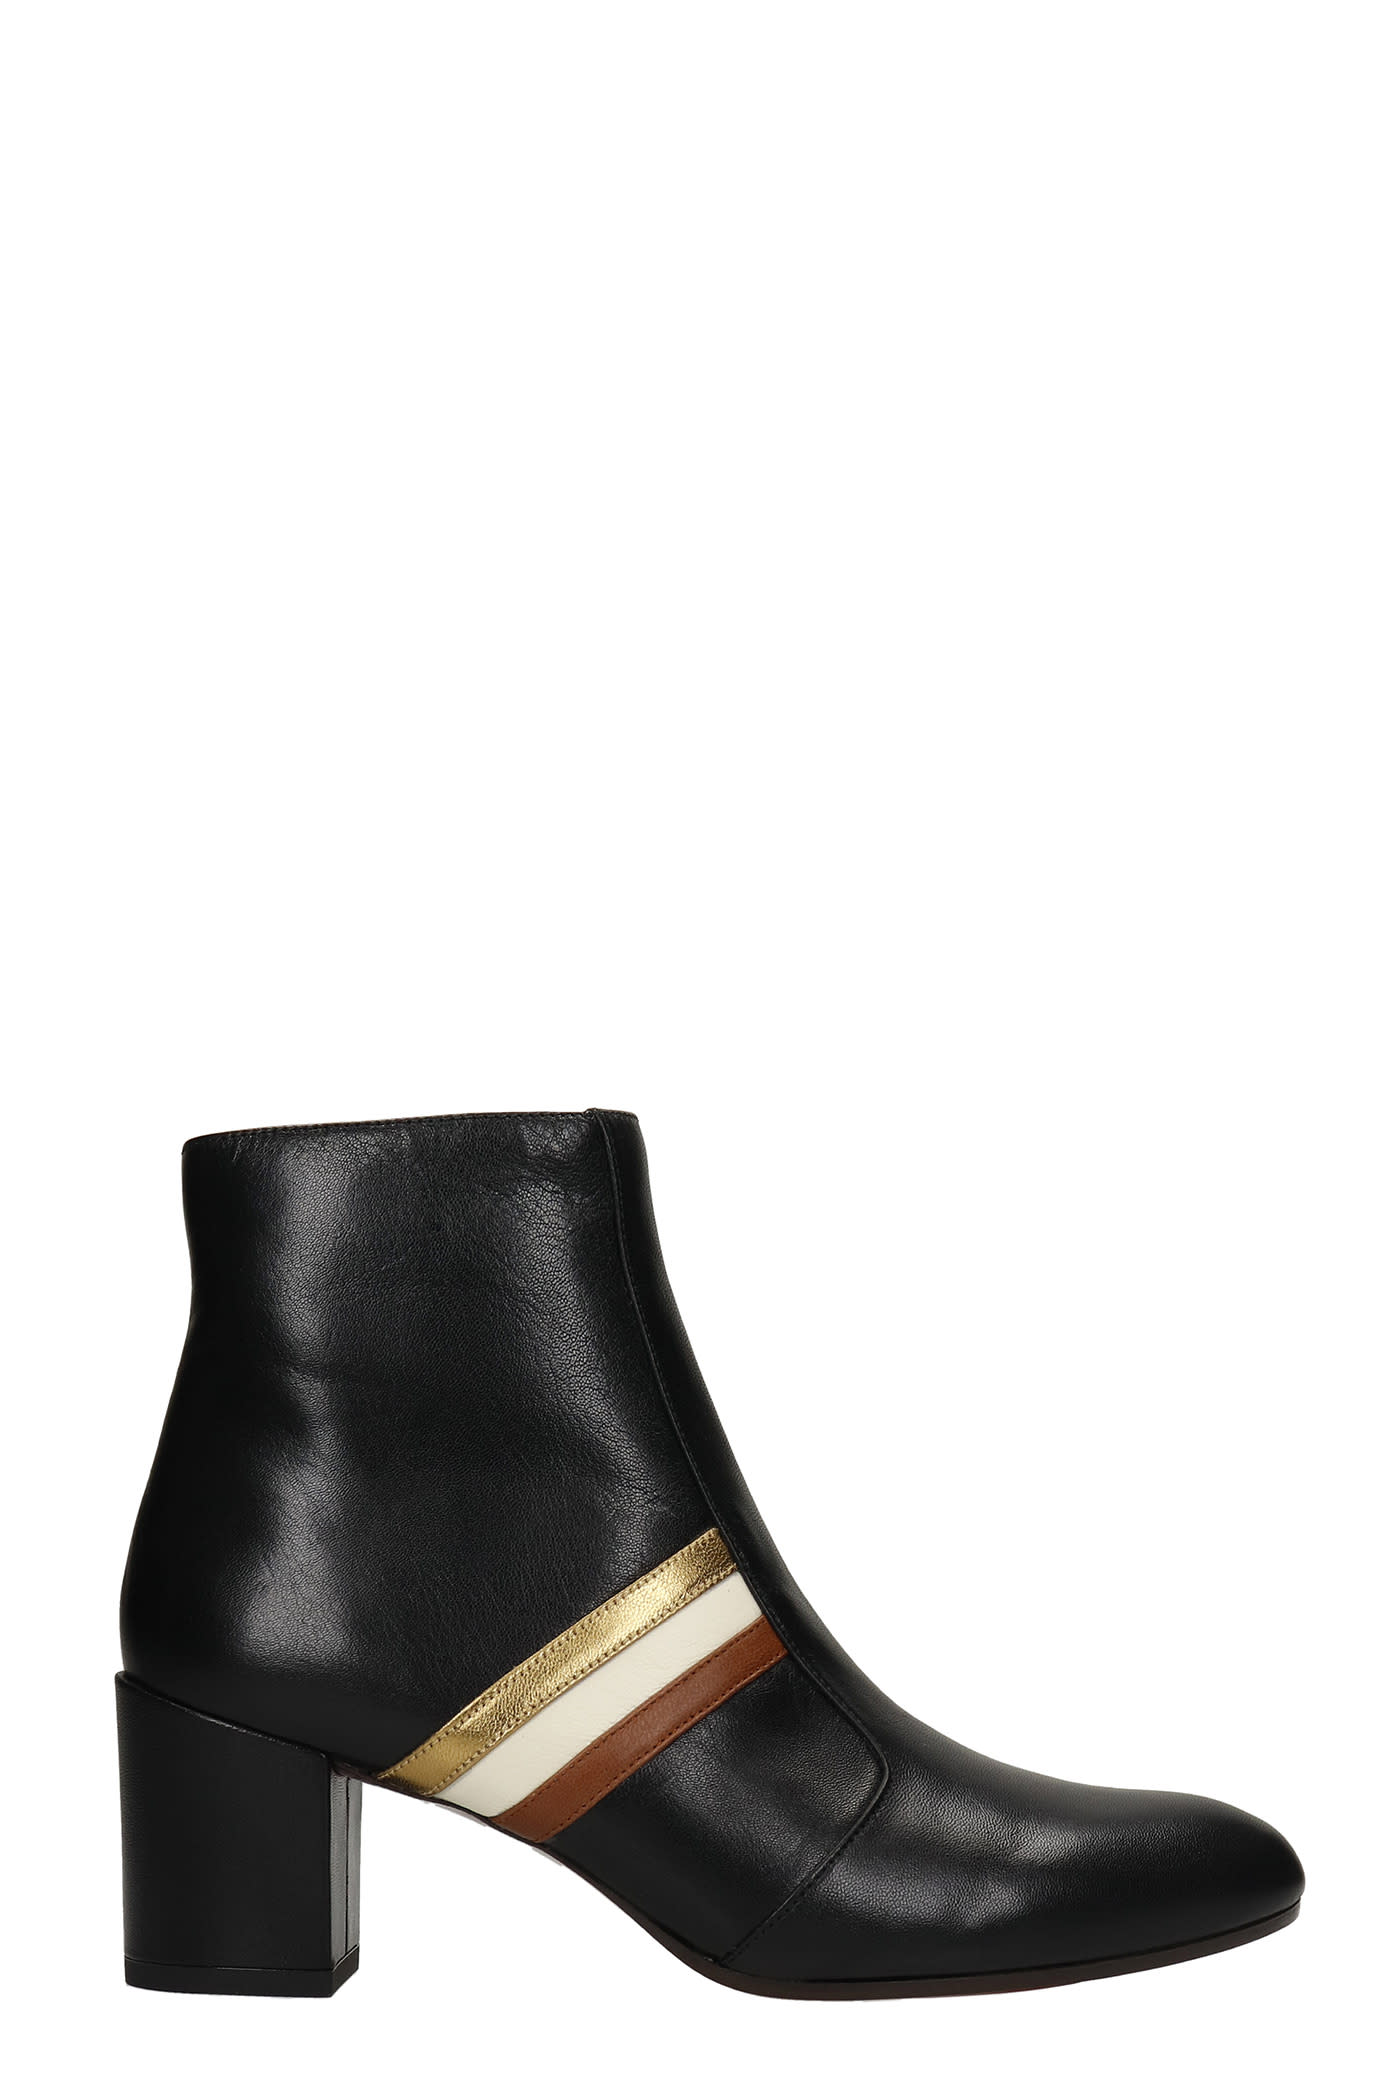 Chie Mihara Nusha High Heels Ankle Boots In Black Leather